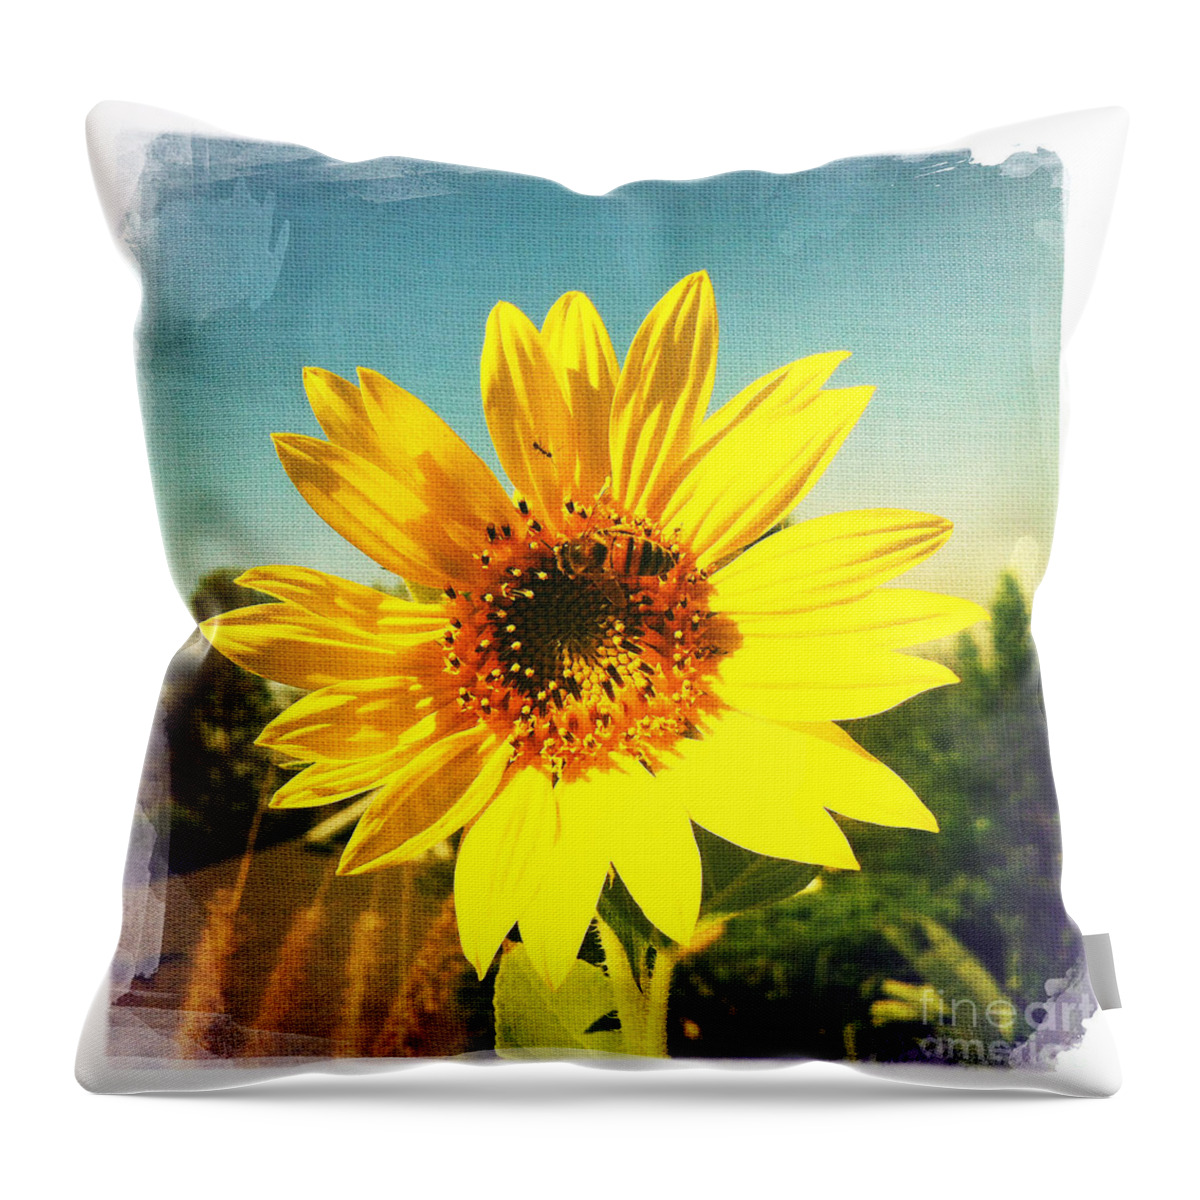 Sunny Day Sunflower Throw Pillow featuring the photograph Sunny Day Sunflower by Nina Prommer